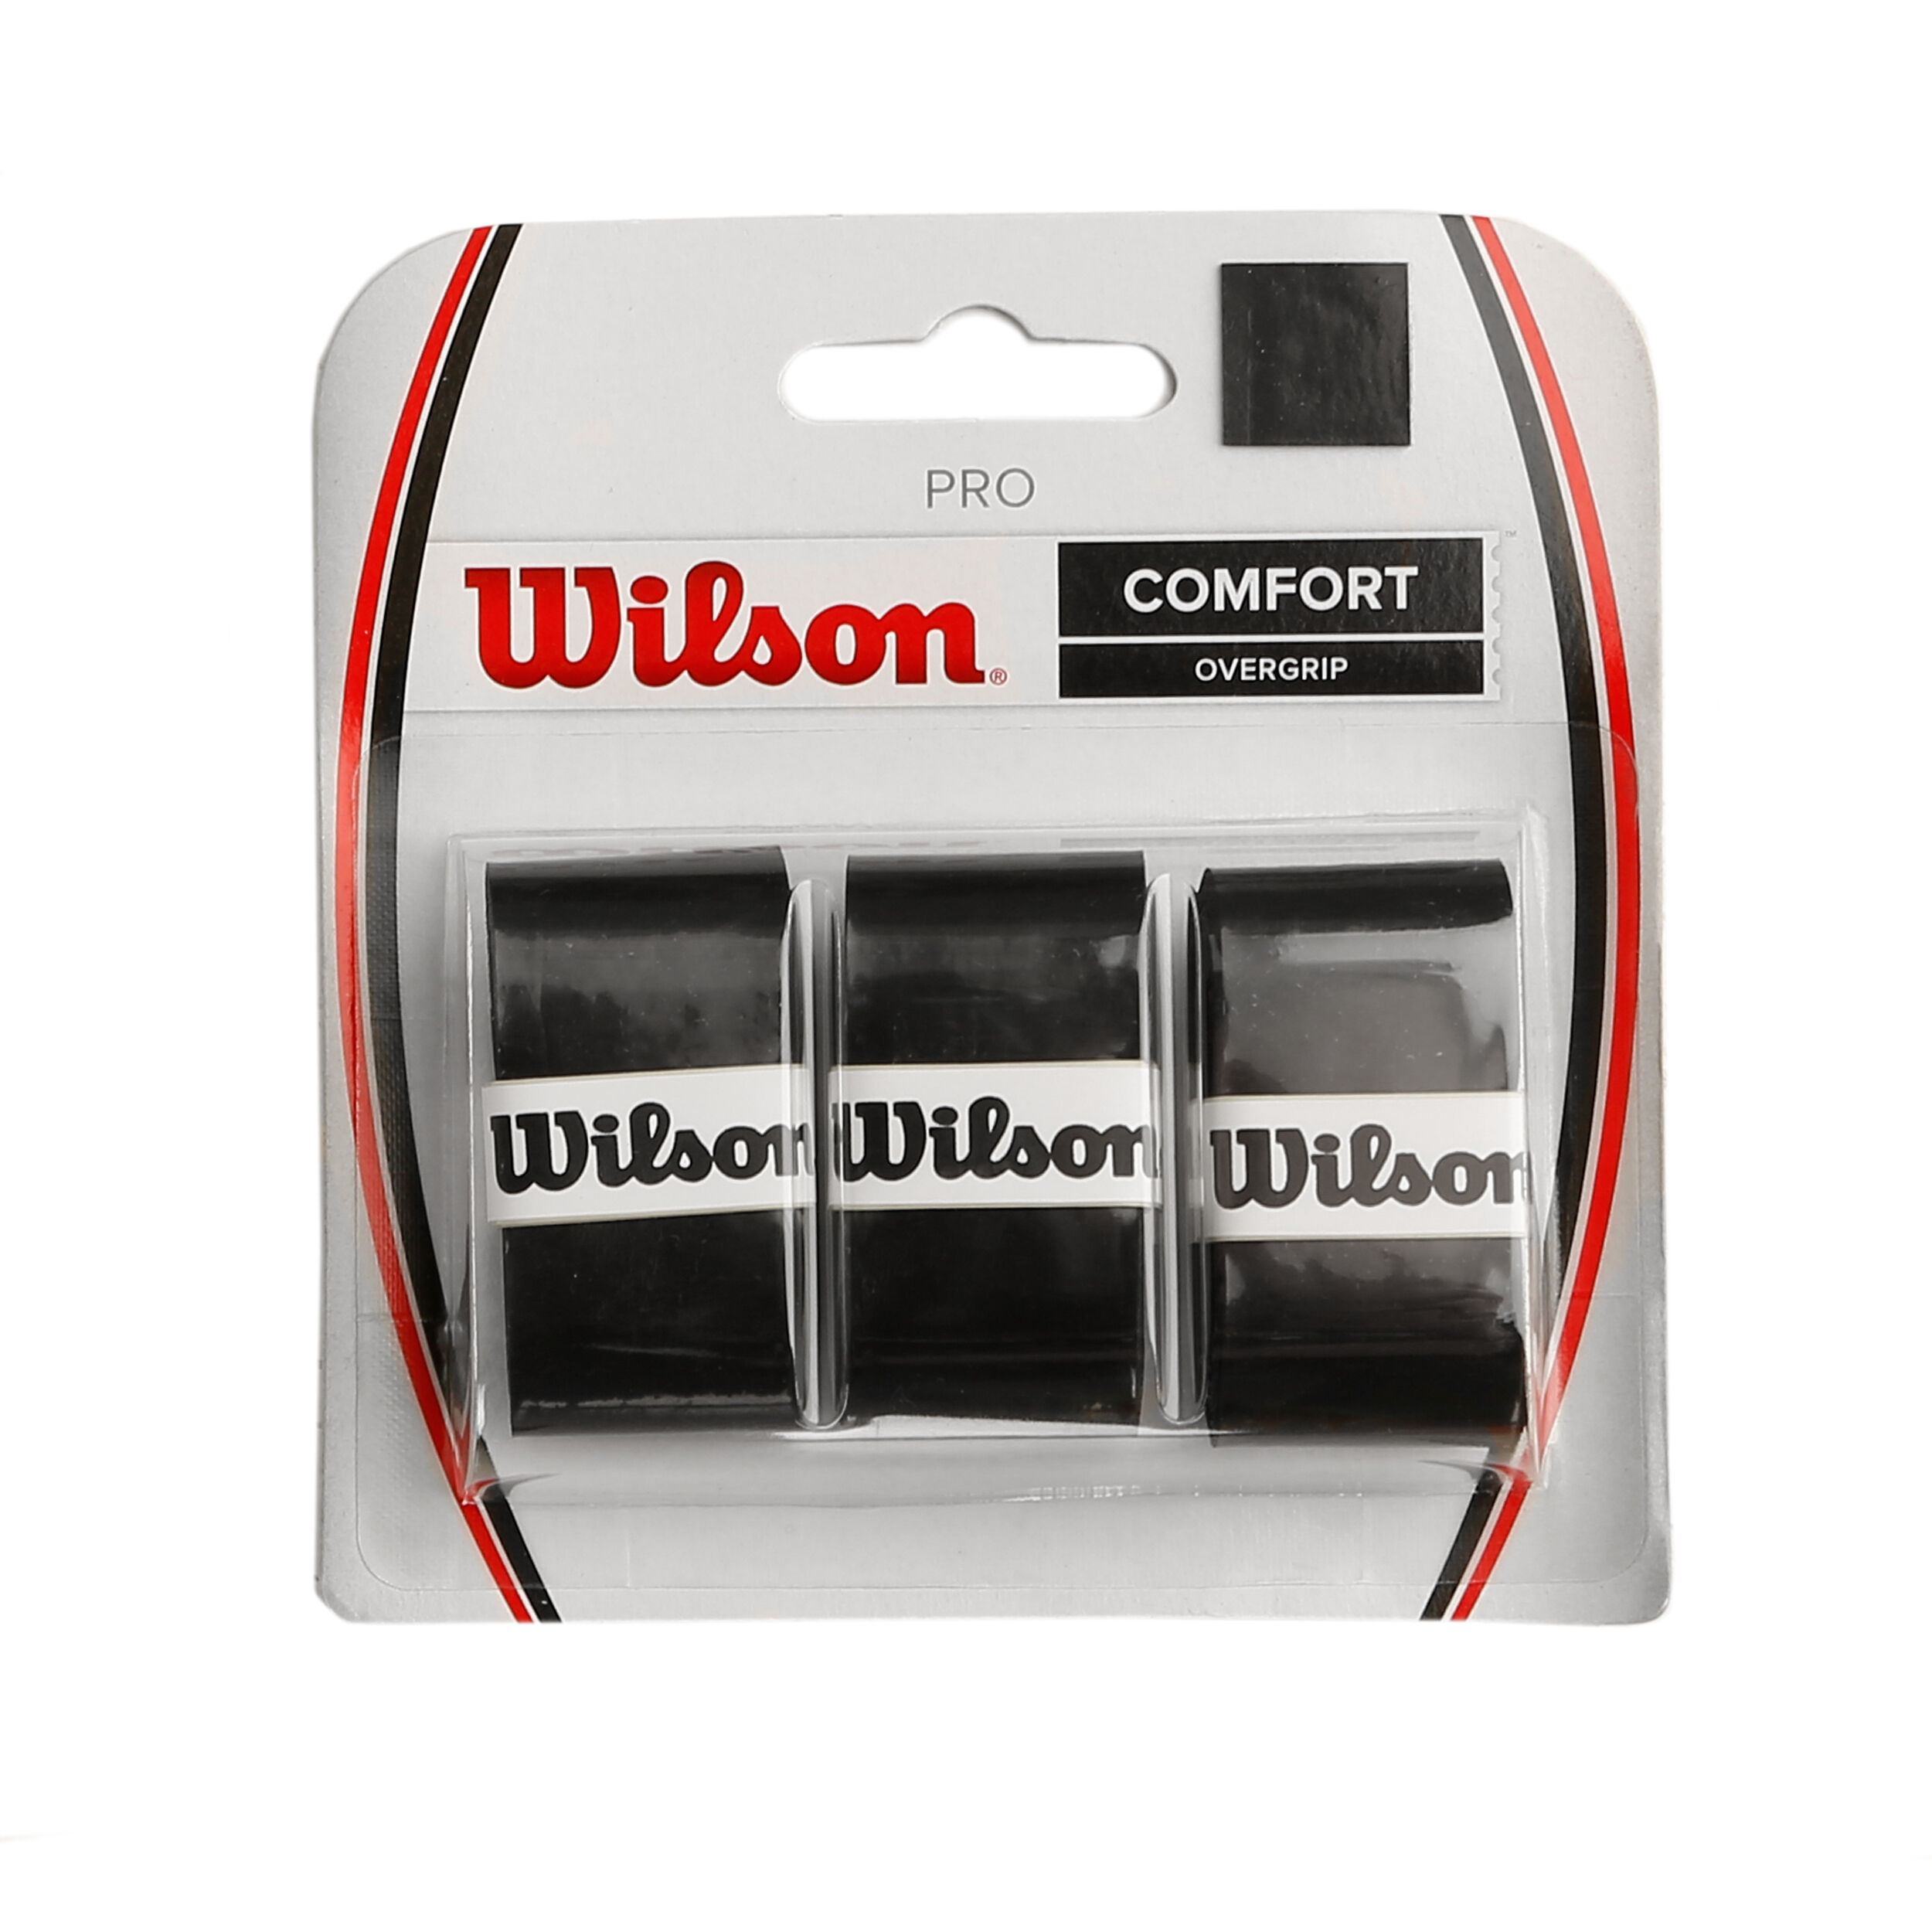 COMFORT MIXED COLOURS BOWL O' 50 GRIPS WILSON PRO OVERGRIP RRP £100 